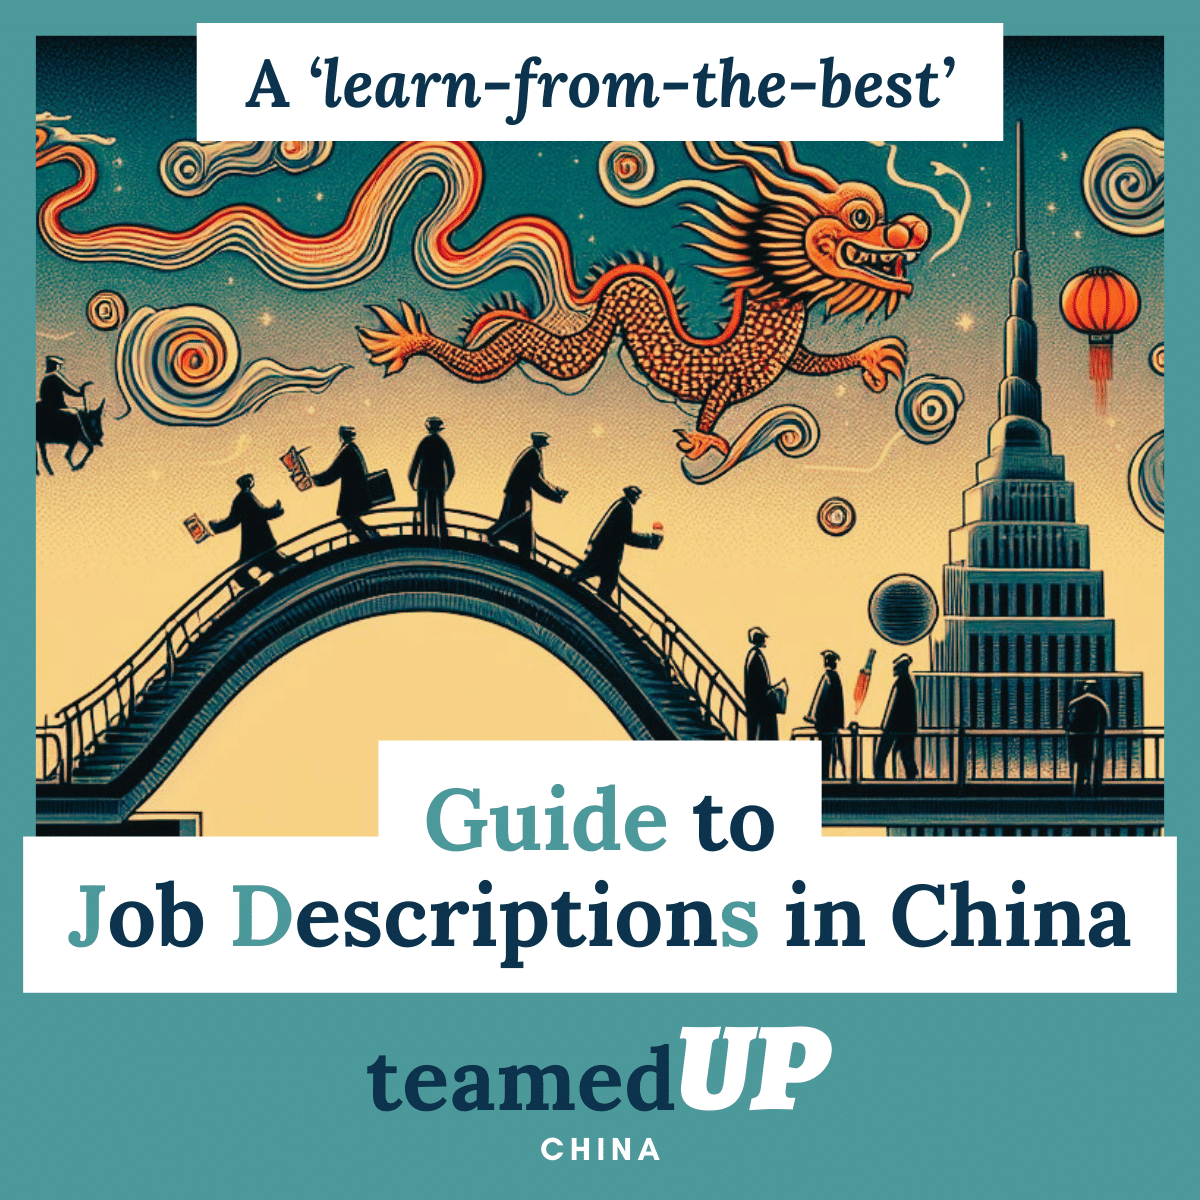 A Guide to Job Descriptions in China - TeamedUp China